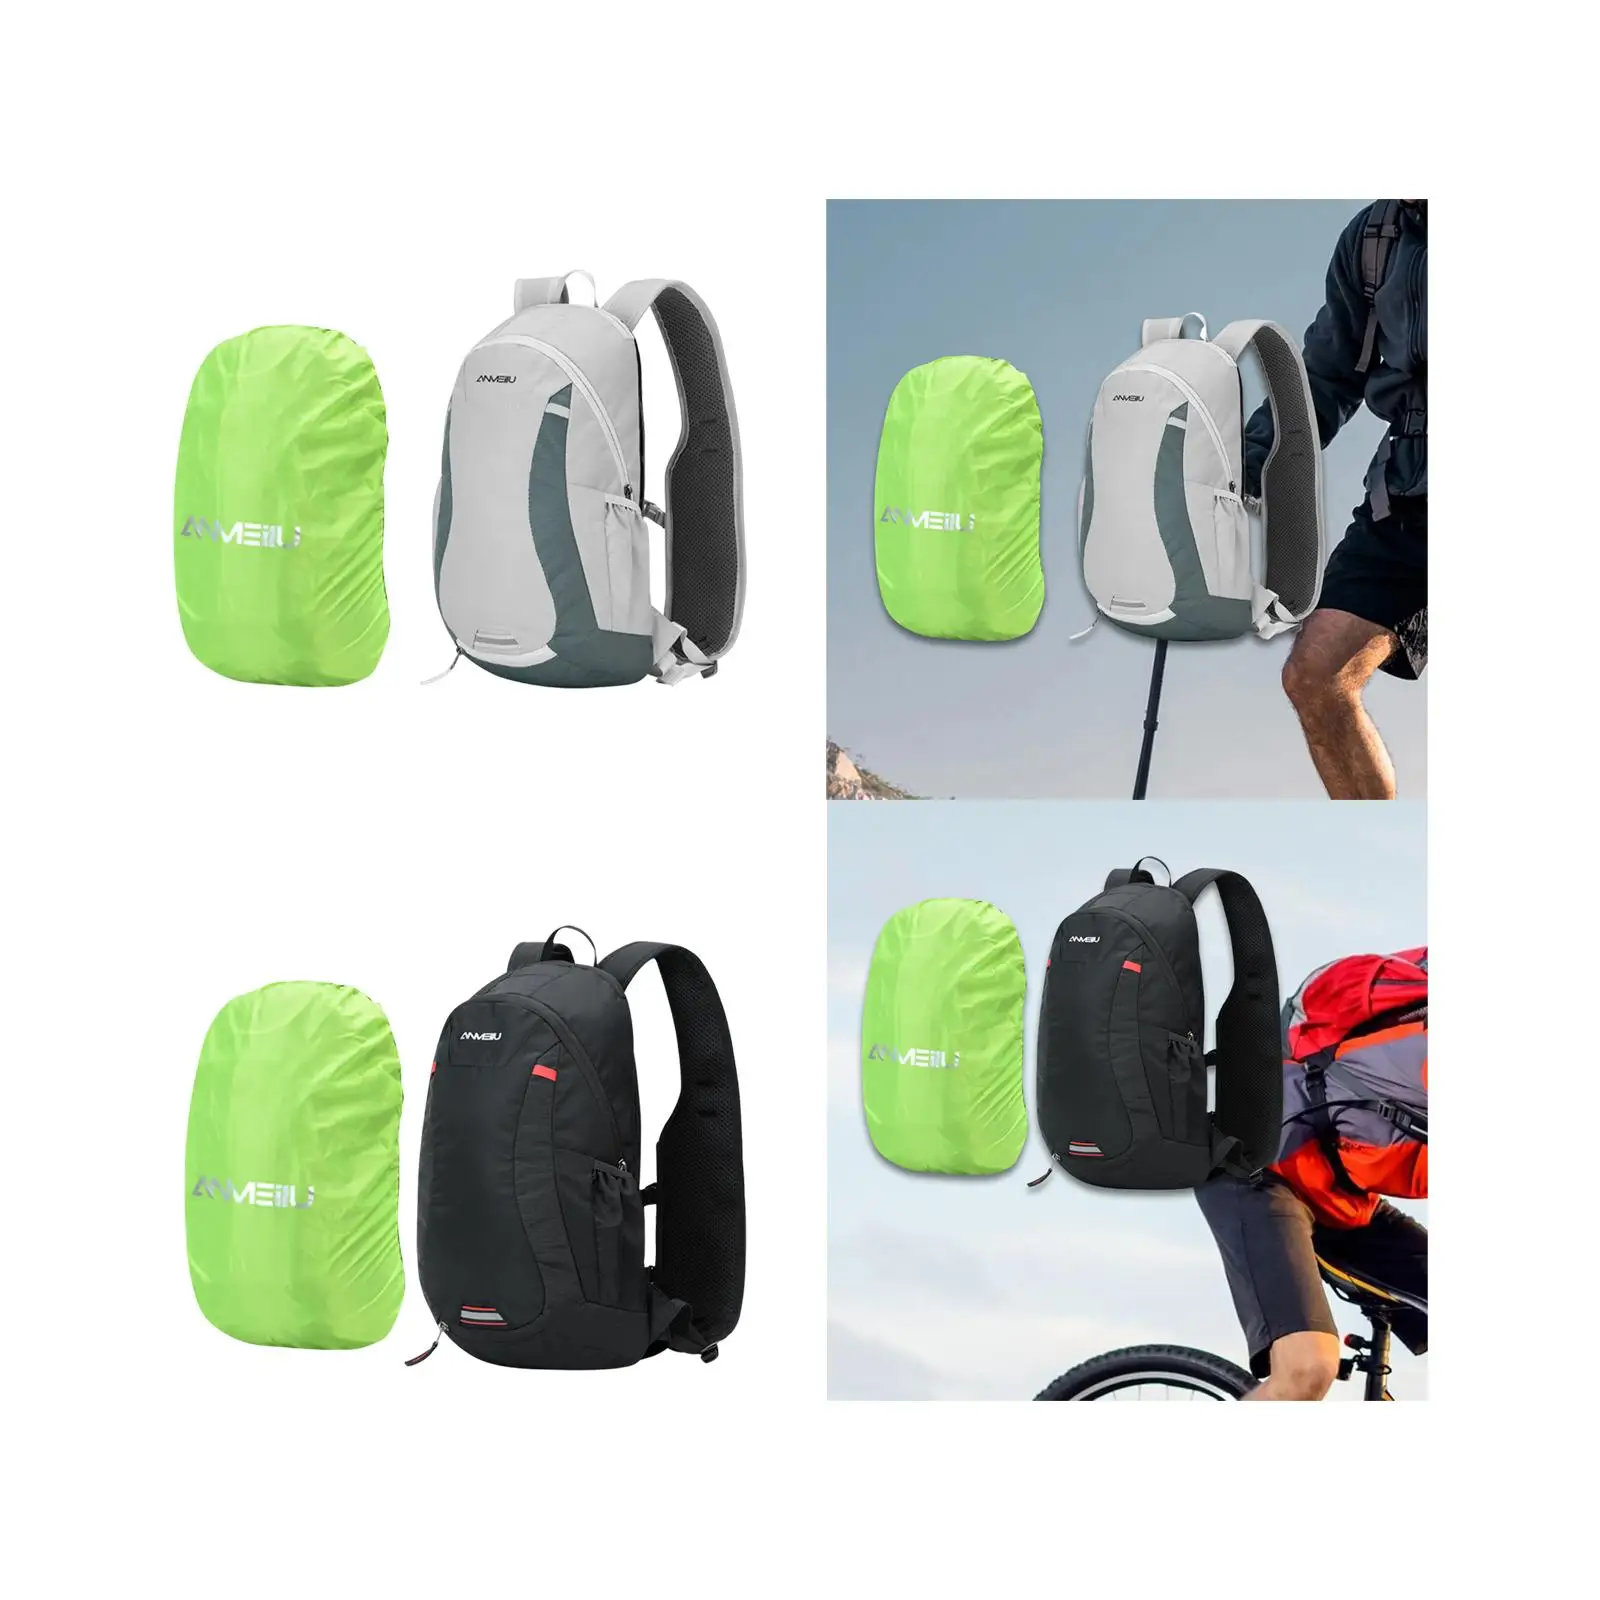 Biking Backpack Father`s Day Gift Lightweight Durable Luggage Travel Bag Hiking